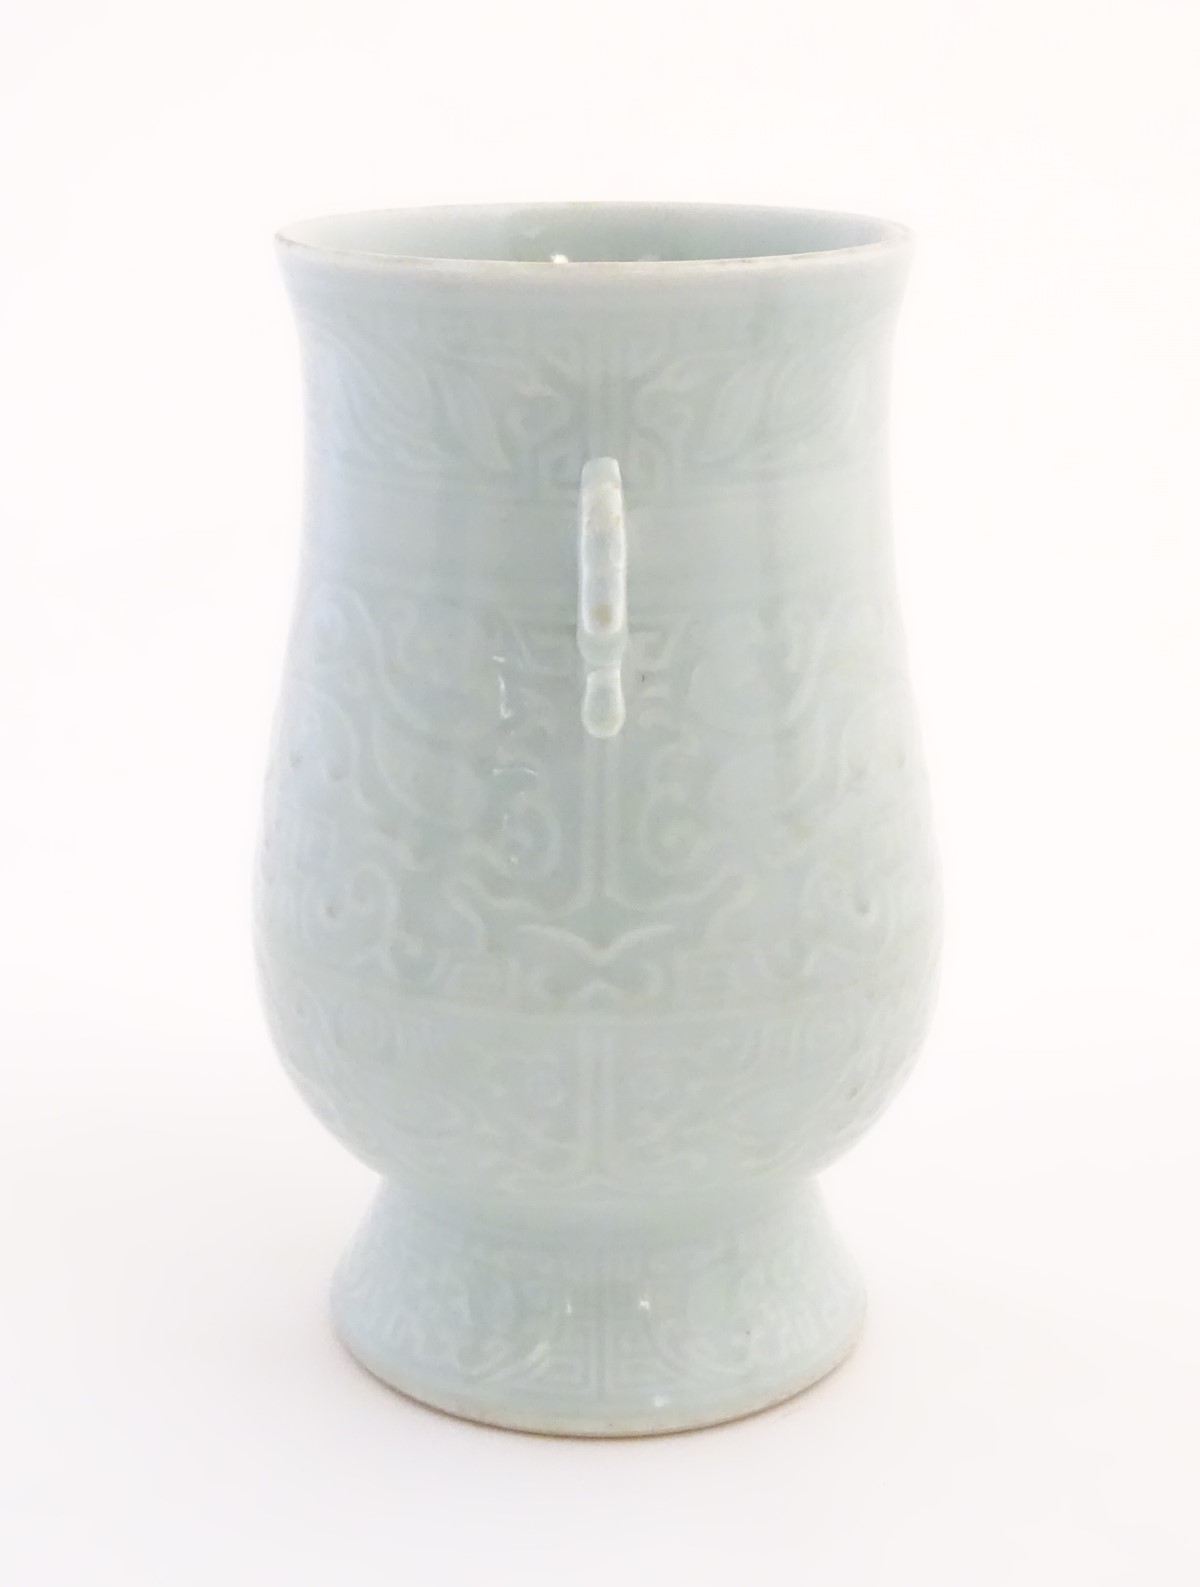 A Chinese celadon 'Jun' shaped vase with scrolling handles, decorated with symbols and patterns. - Image 4 of 8